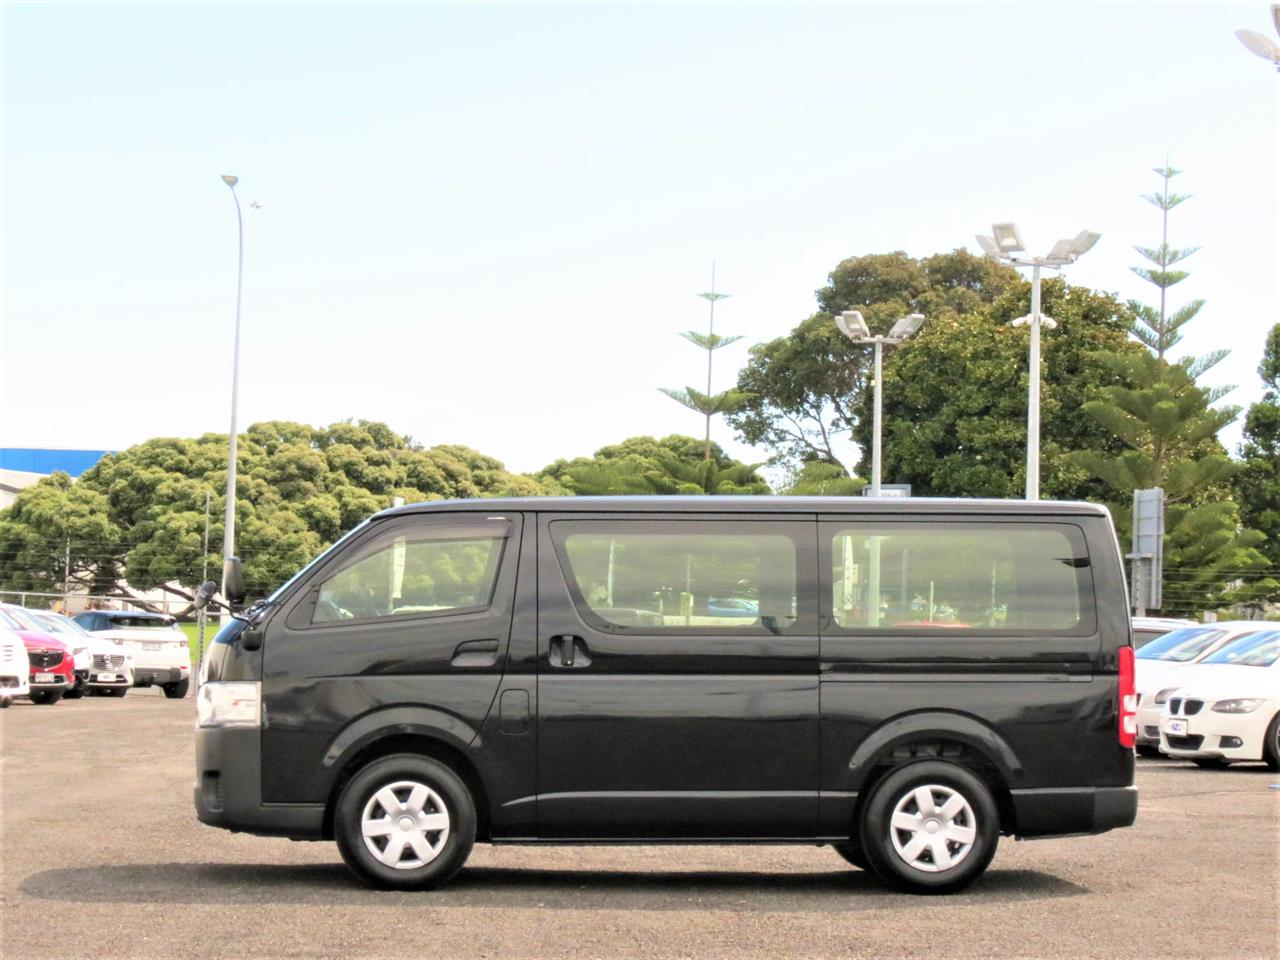 2019 Toyota Hiace only $127 weekly